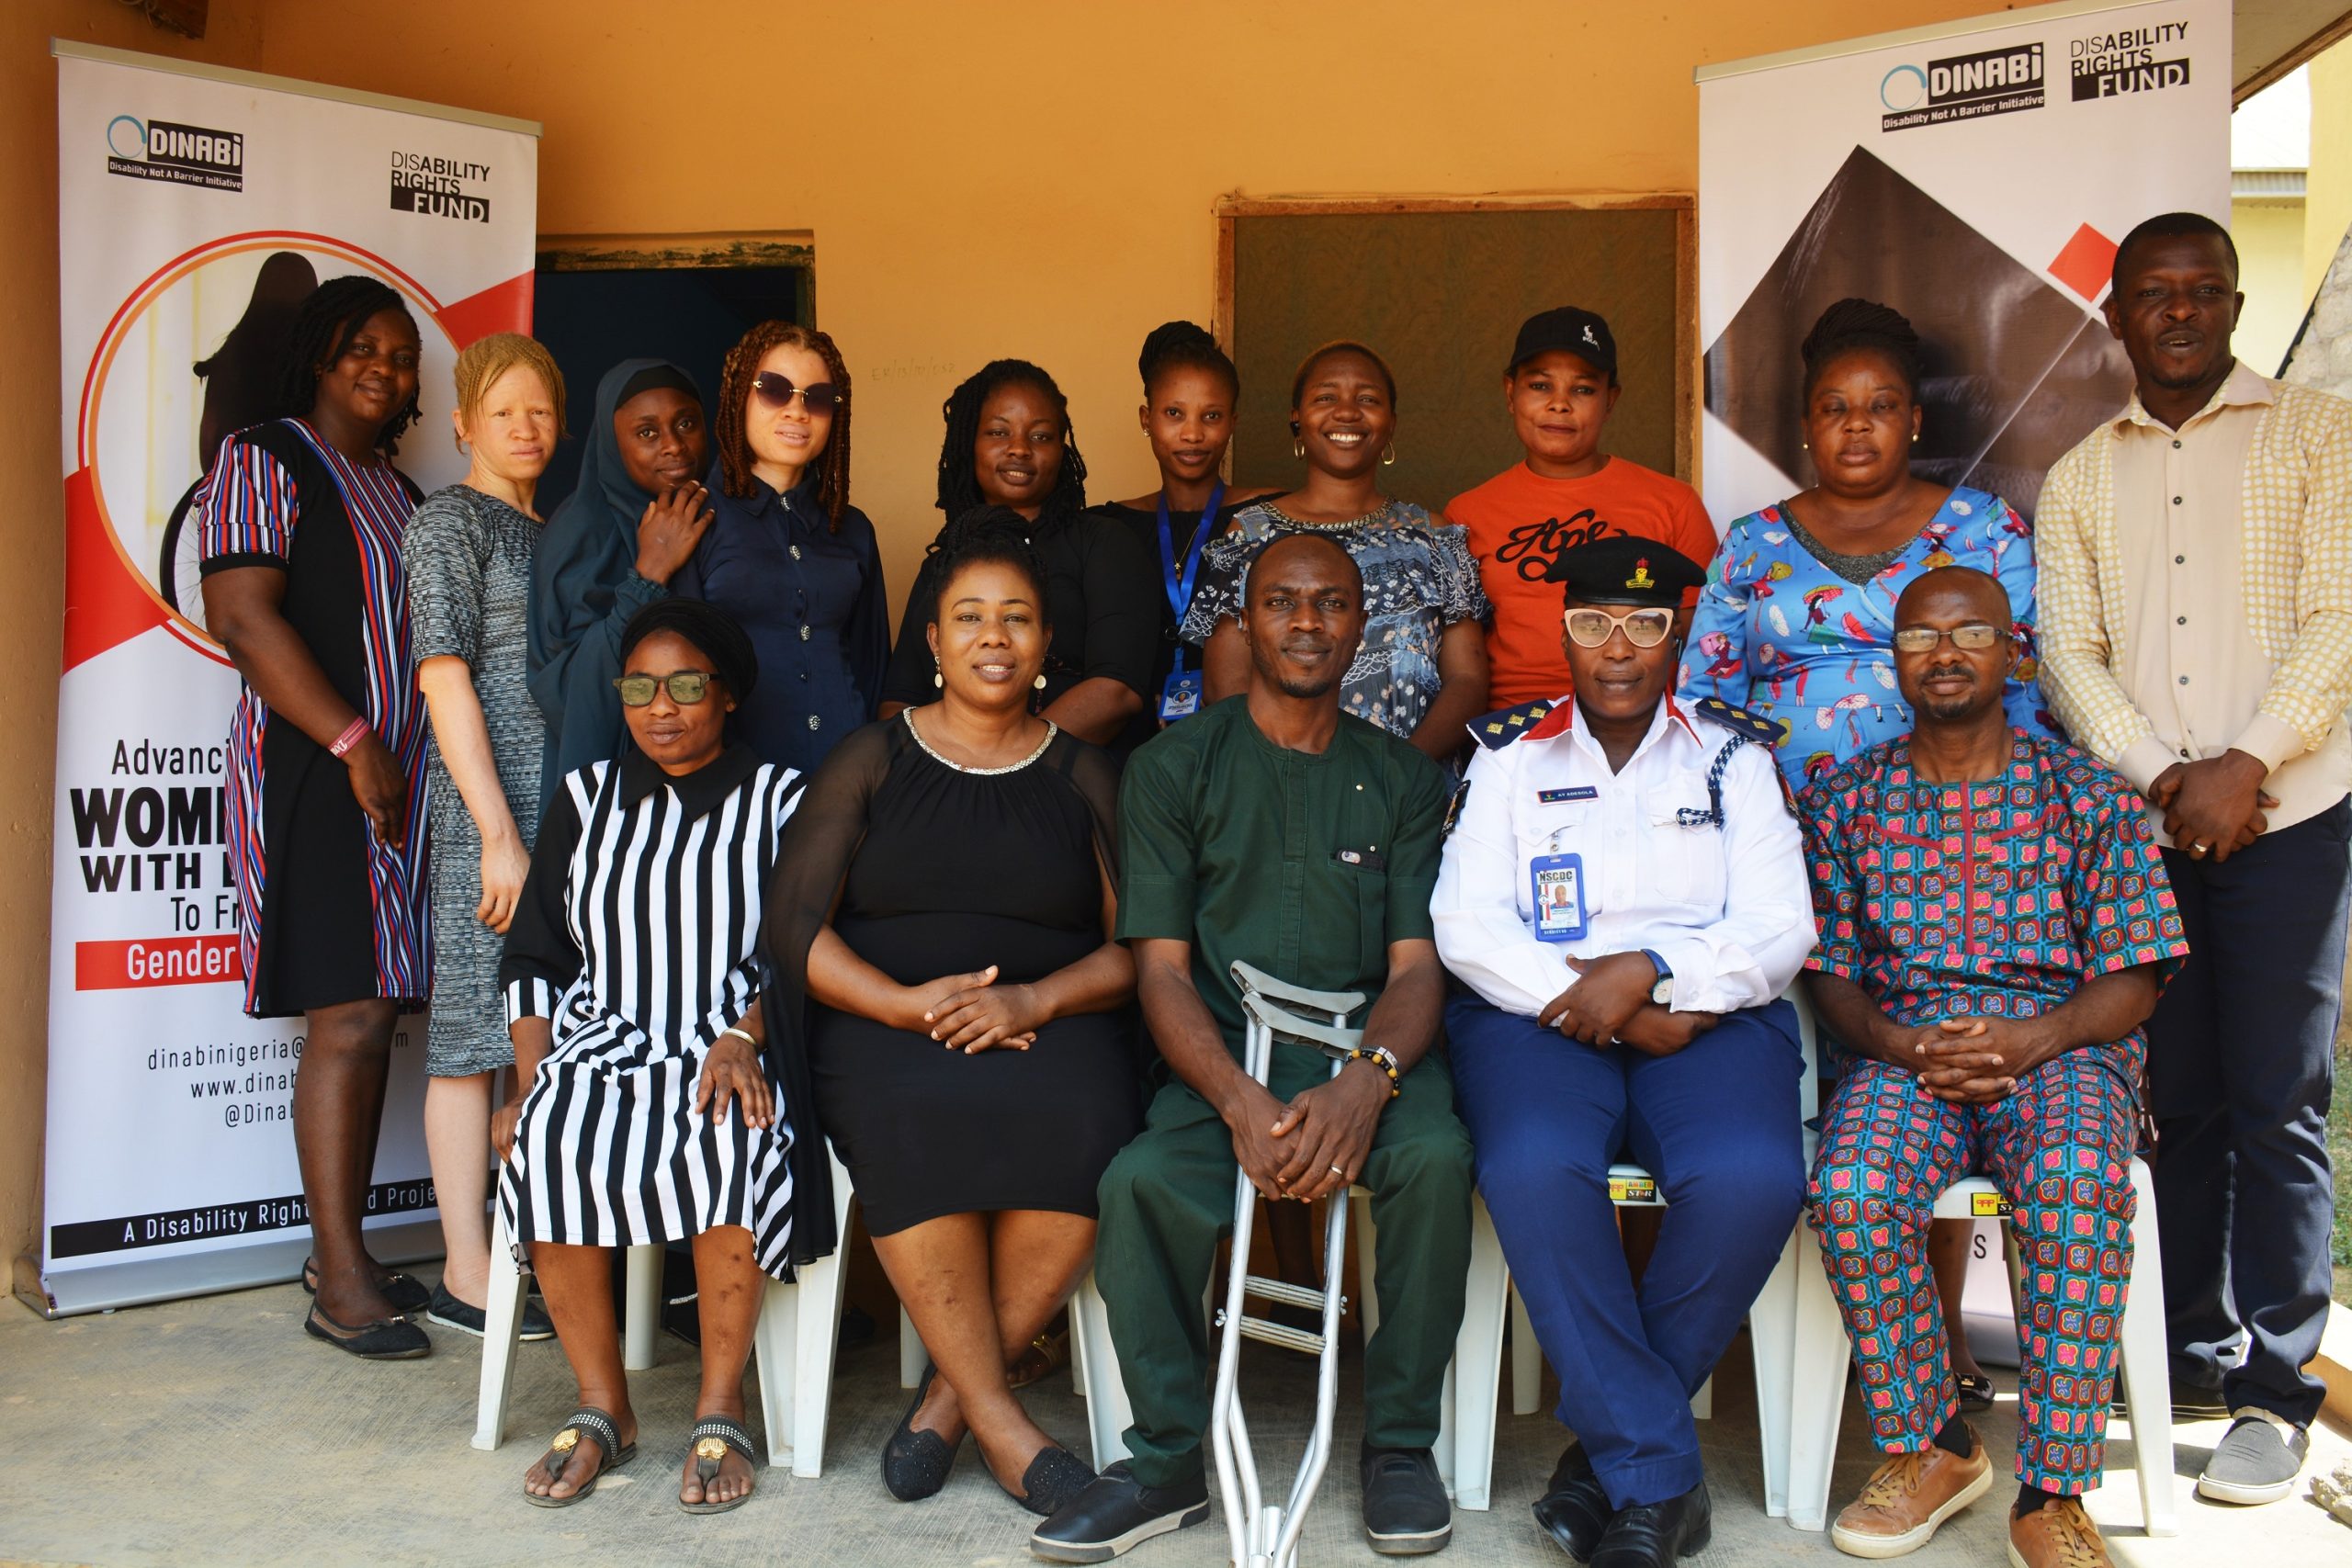 DINABI Develops Policy Brief to tackle GBV against Women with Disabilities